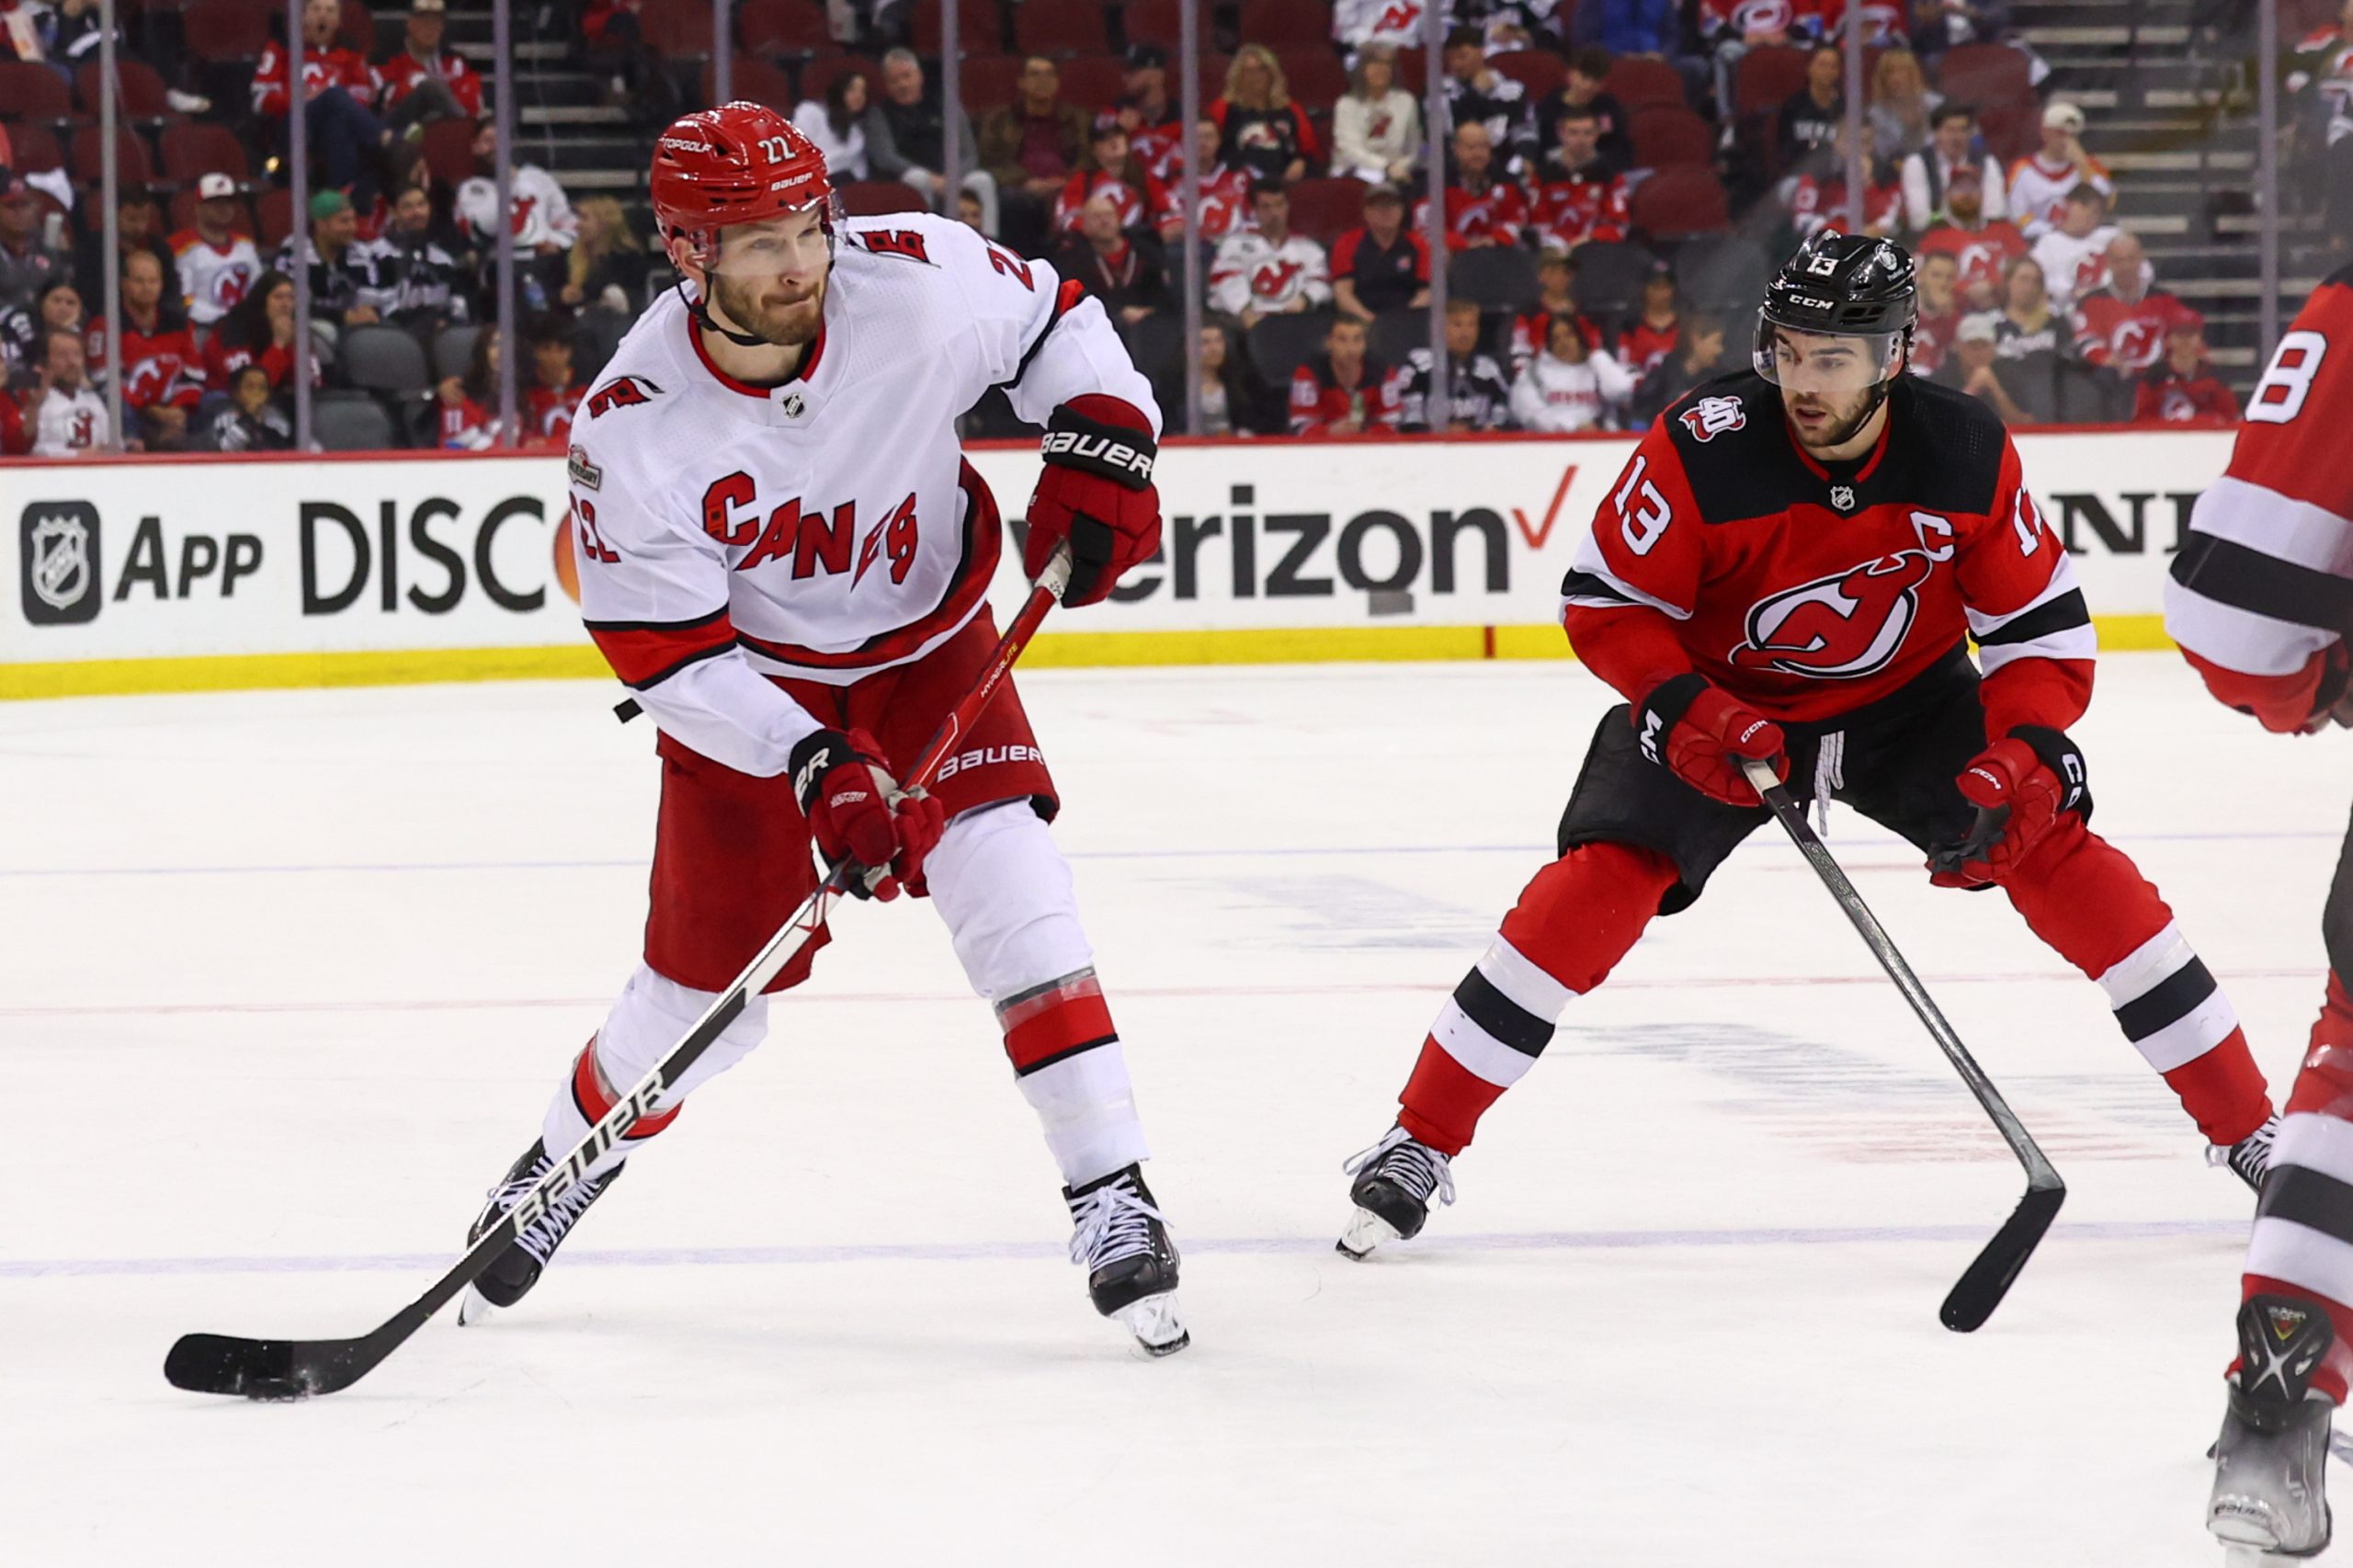 Tight NHL salary cap means great Charlotte Checkers hockey